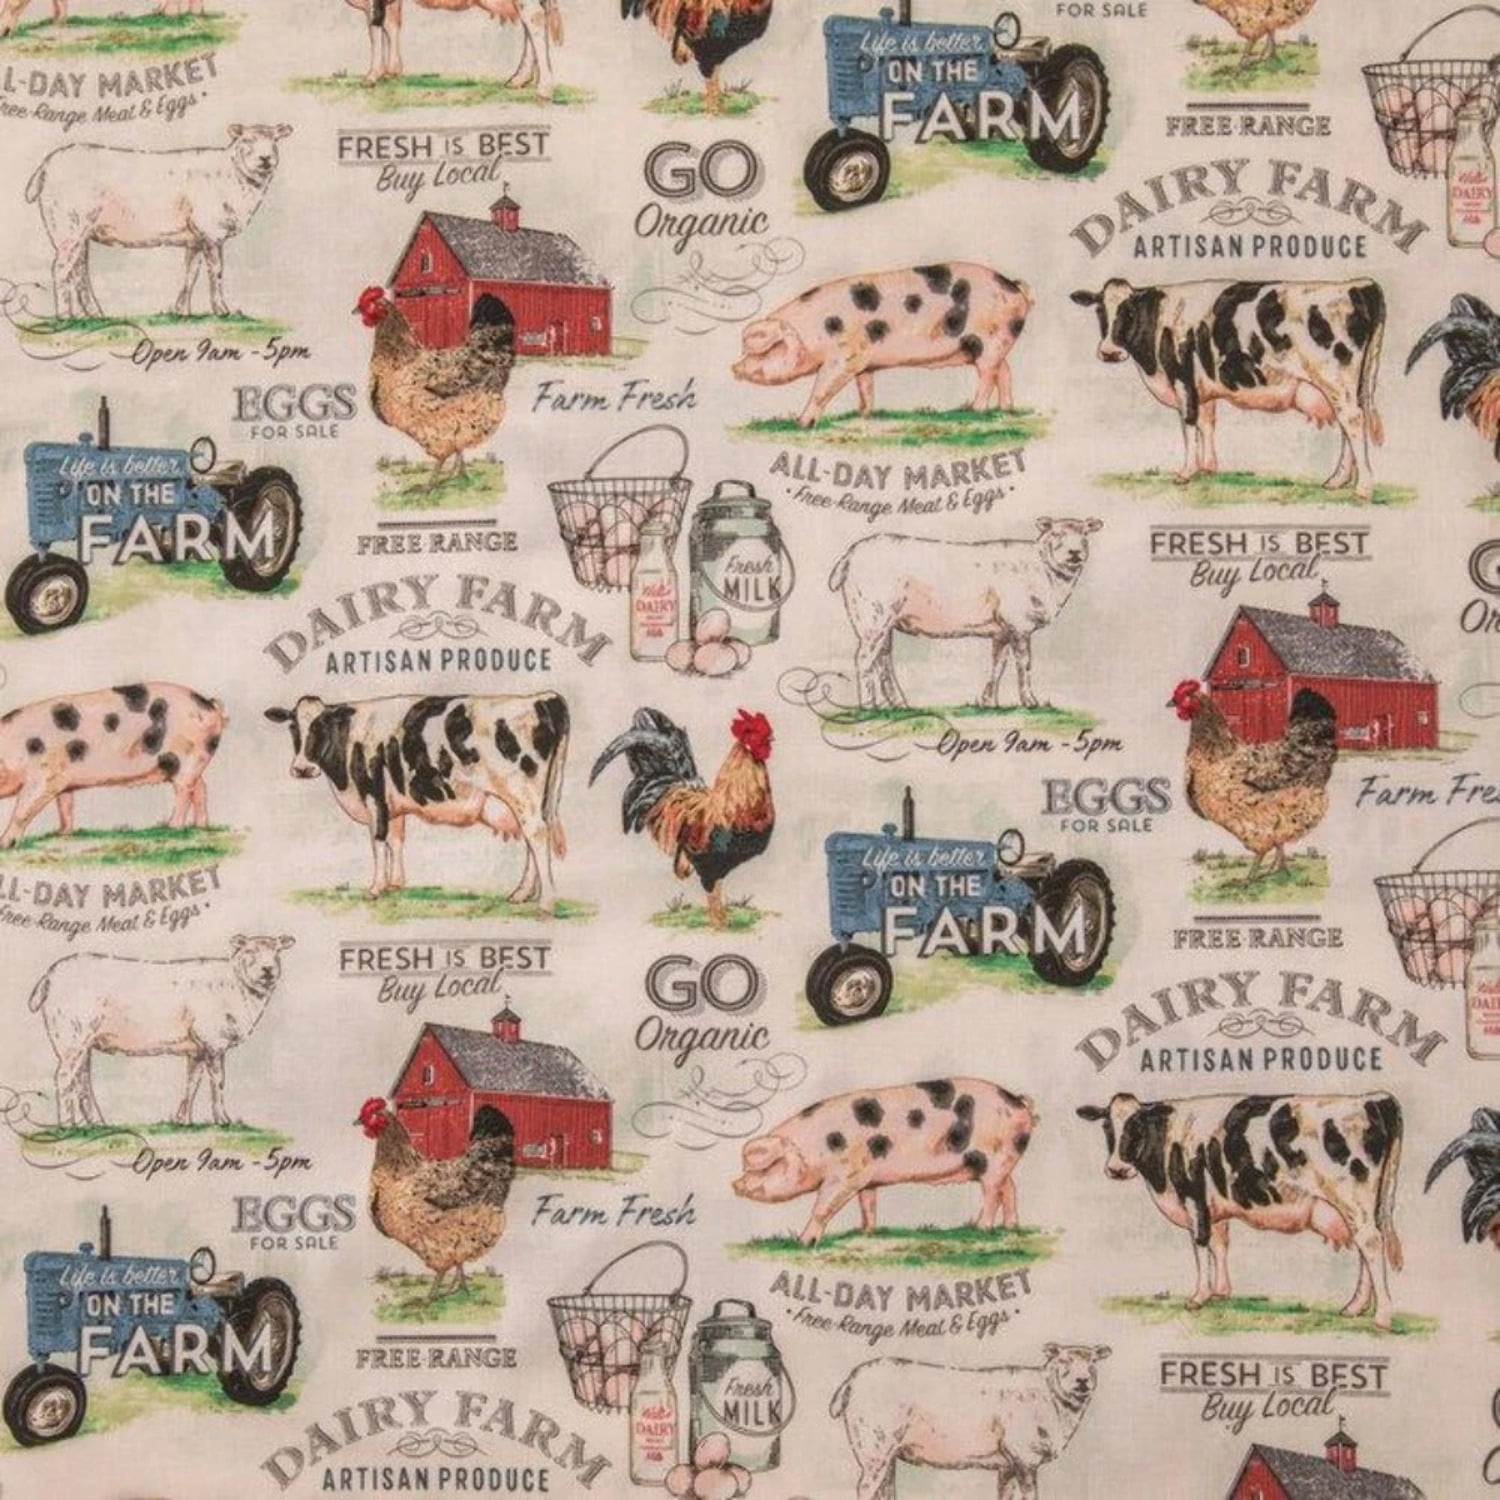 Pigs,Sheep & Chickens Vinyl Tablecloth Assorted Sizes Farmer's Market Cows 